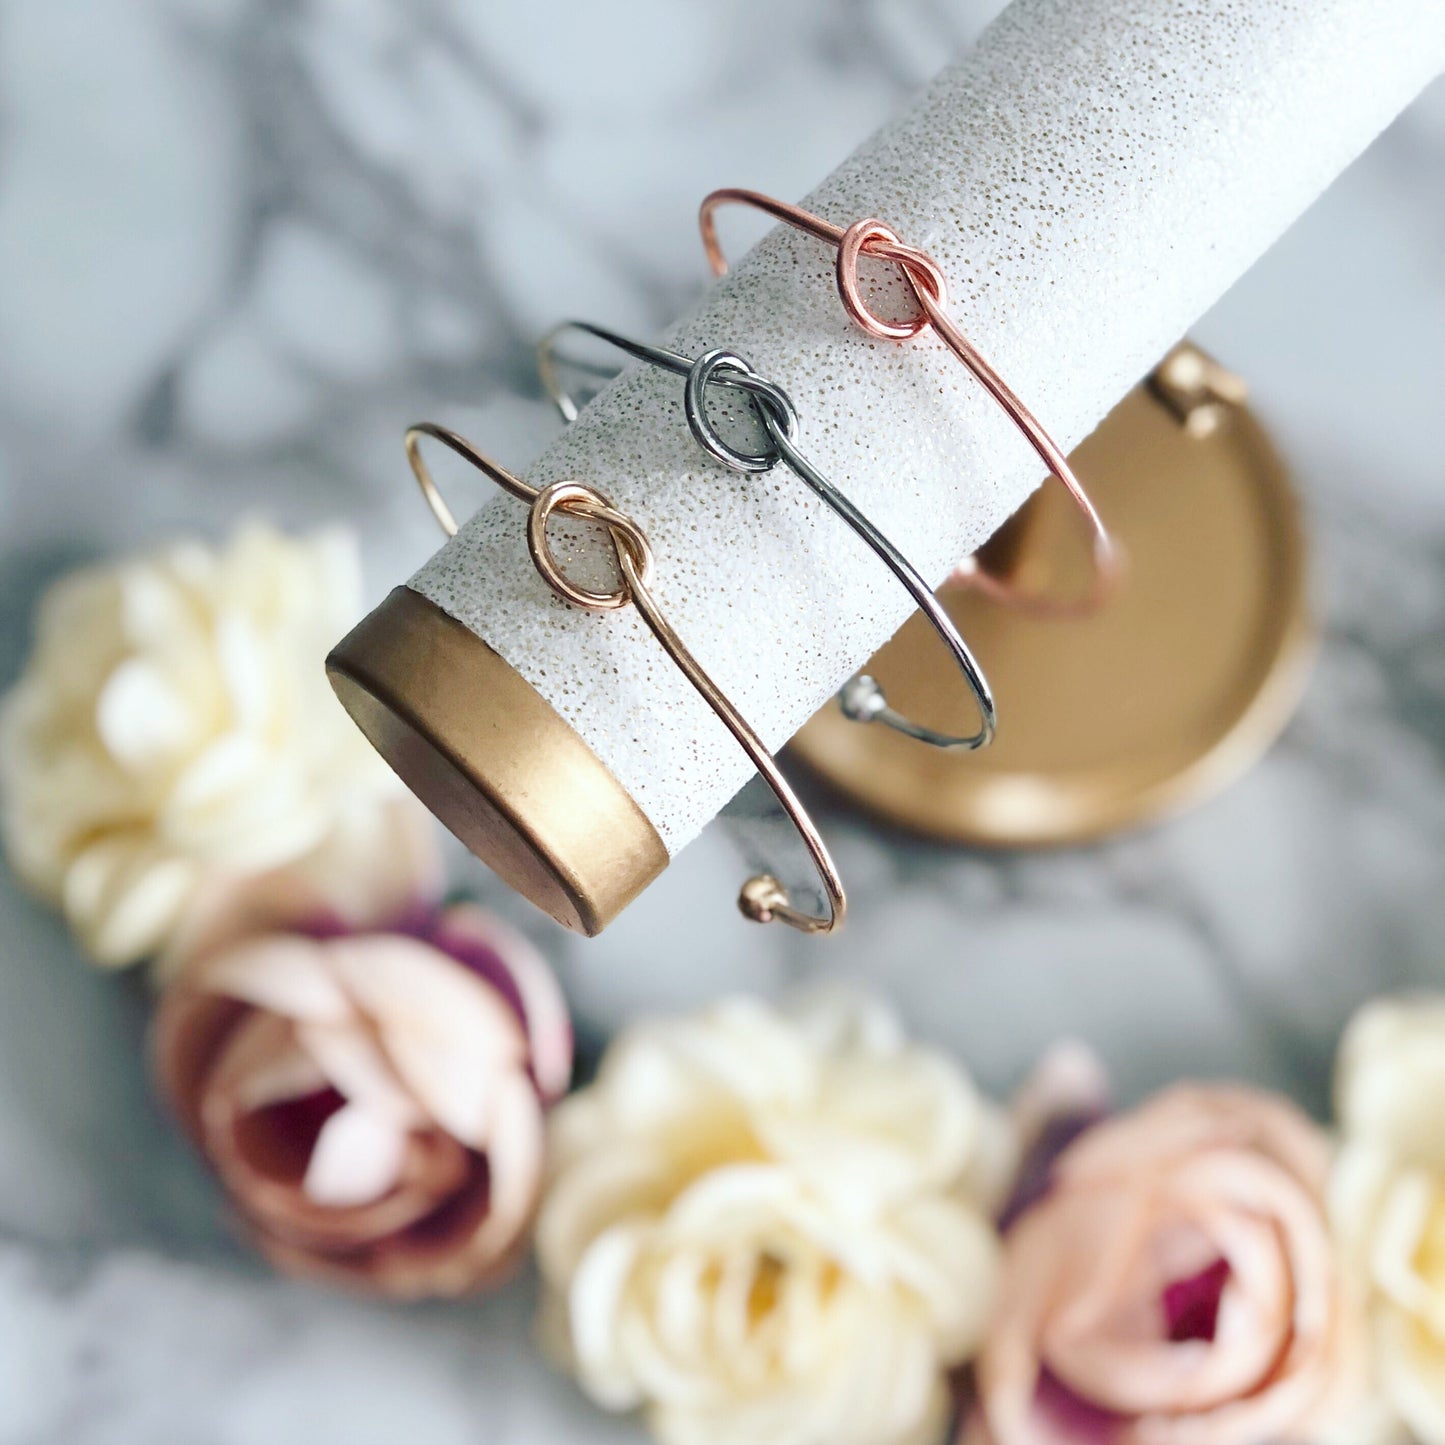 Tie the Knot Bridal Party Bangles